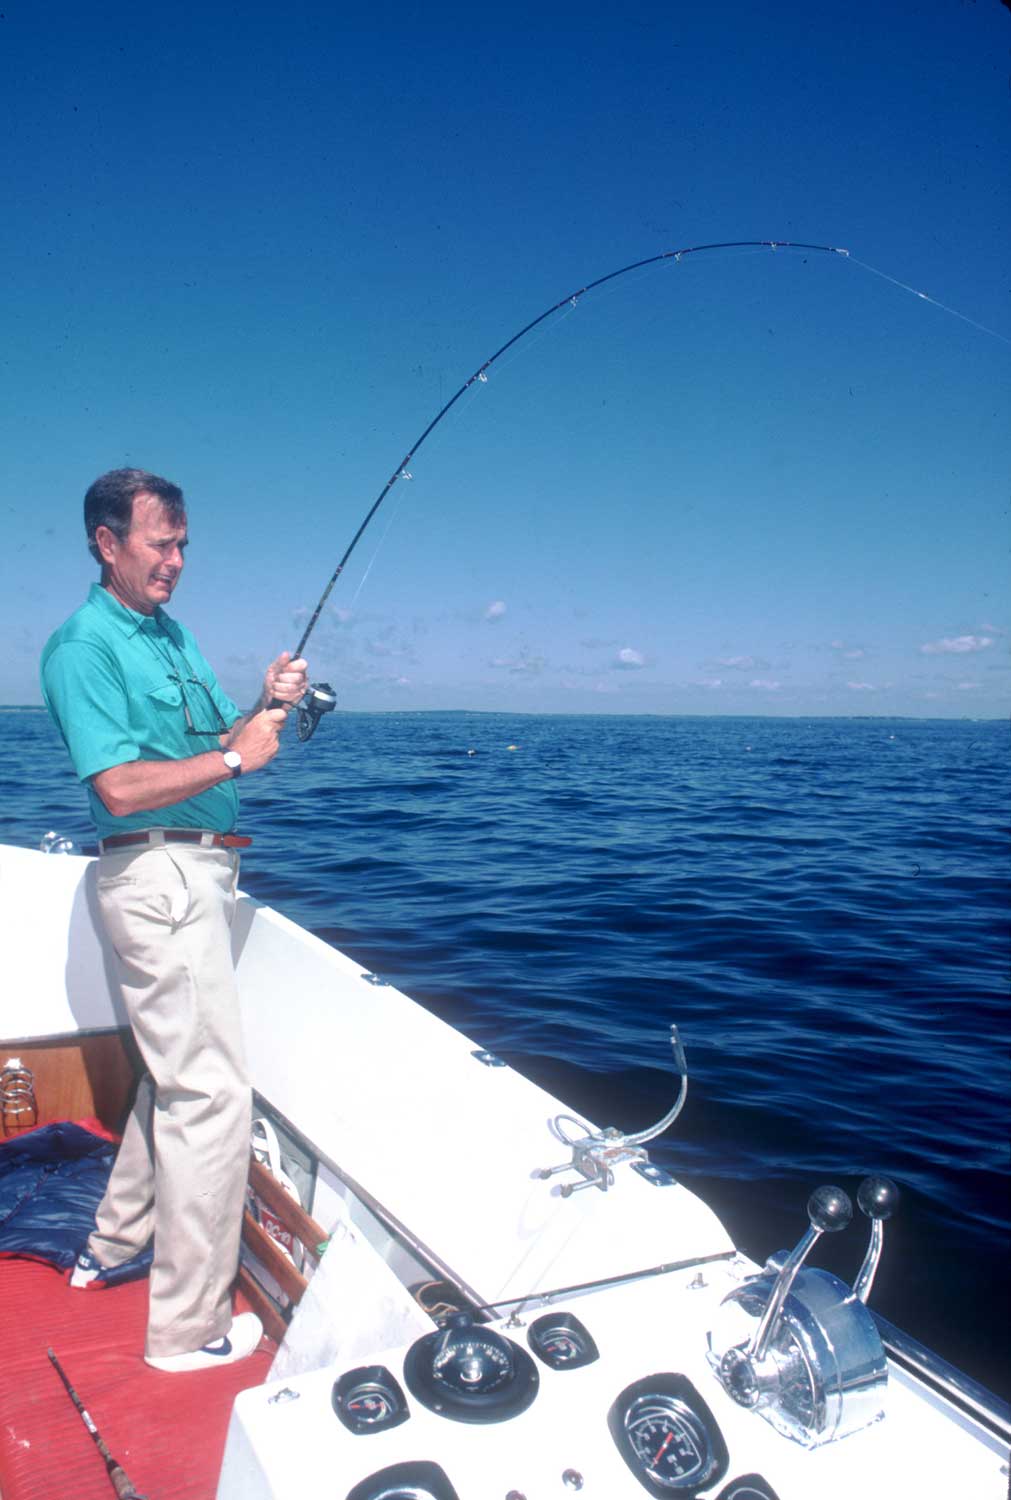 Vice President George Bush tries to catch a fish in August, 1983 in Kennebunkport, Maine. The small town would sometimes be clogged with traffic when Bush, as Vice President and later as President, would visit, reporters in tow.